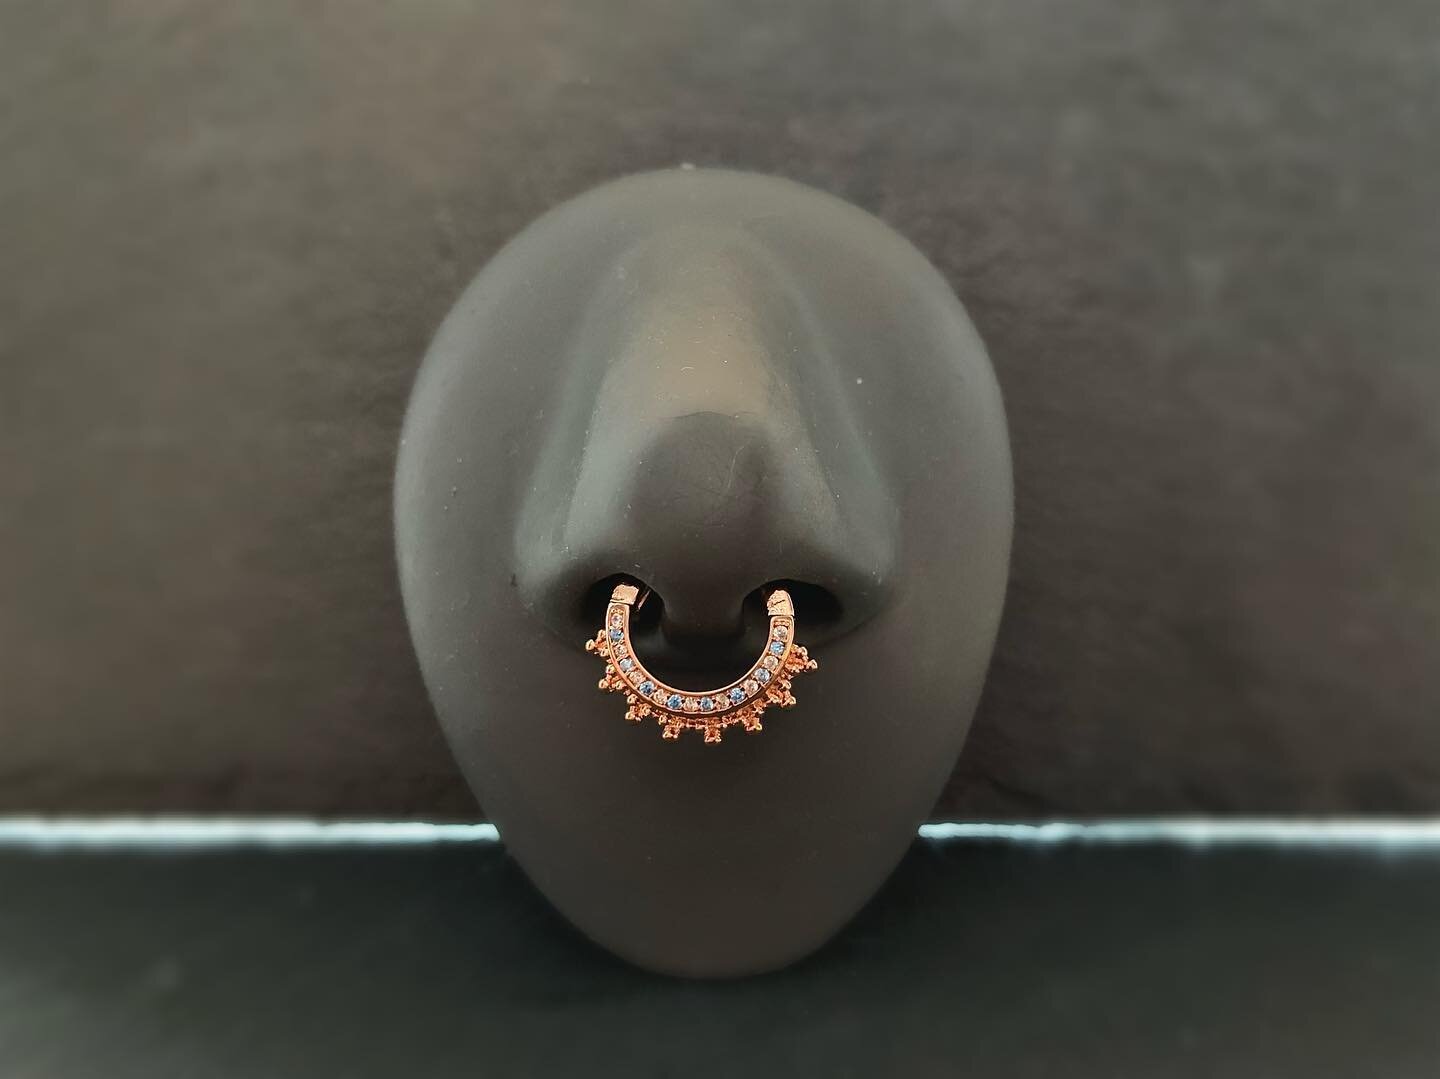 We love a septum with a statement piece. 

$25

&bull;&bull;DM to Book&bull;&bull;

#piercing #bodypiercing #earpiercing #girlswithpiercings #boyswithpiercings #bodymod #princegeorgebc #bc #pierced #jewellery #tunnels #plugs #hellyeahprincegeorge #he